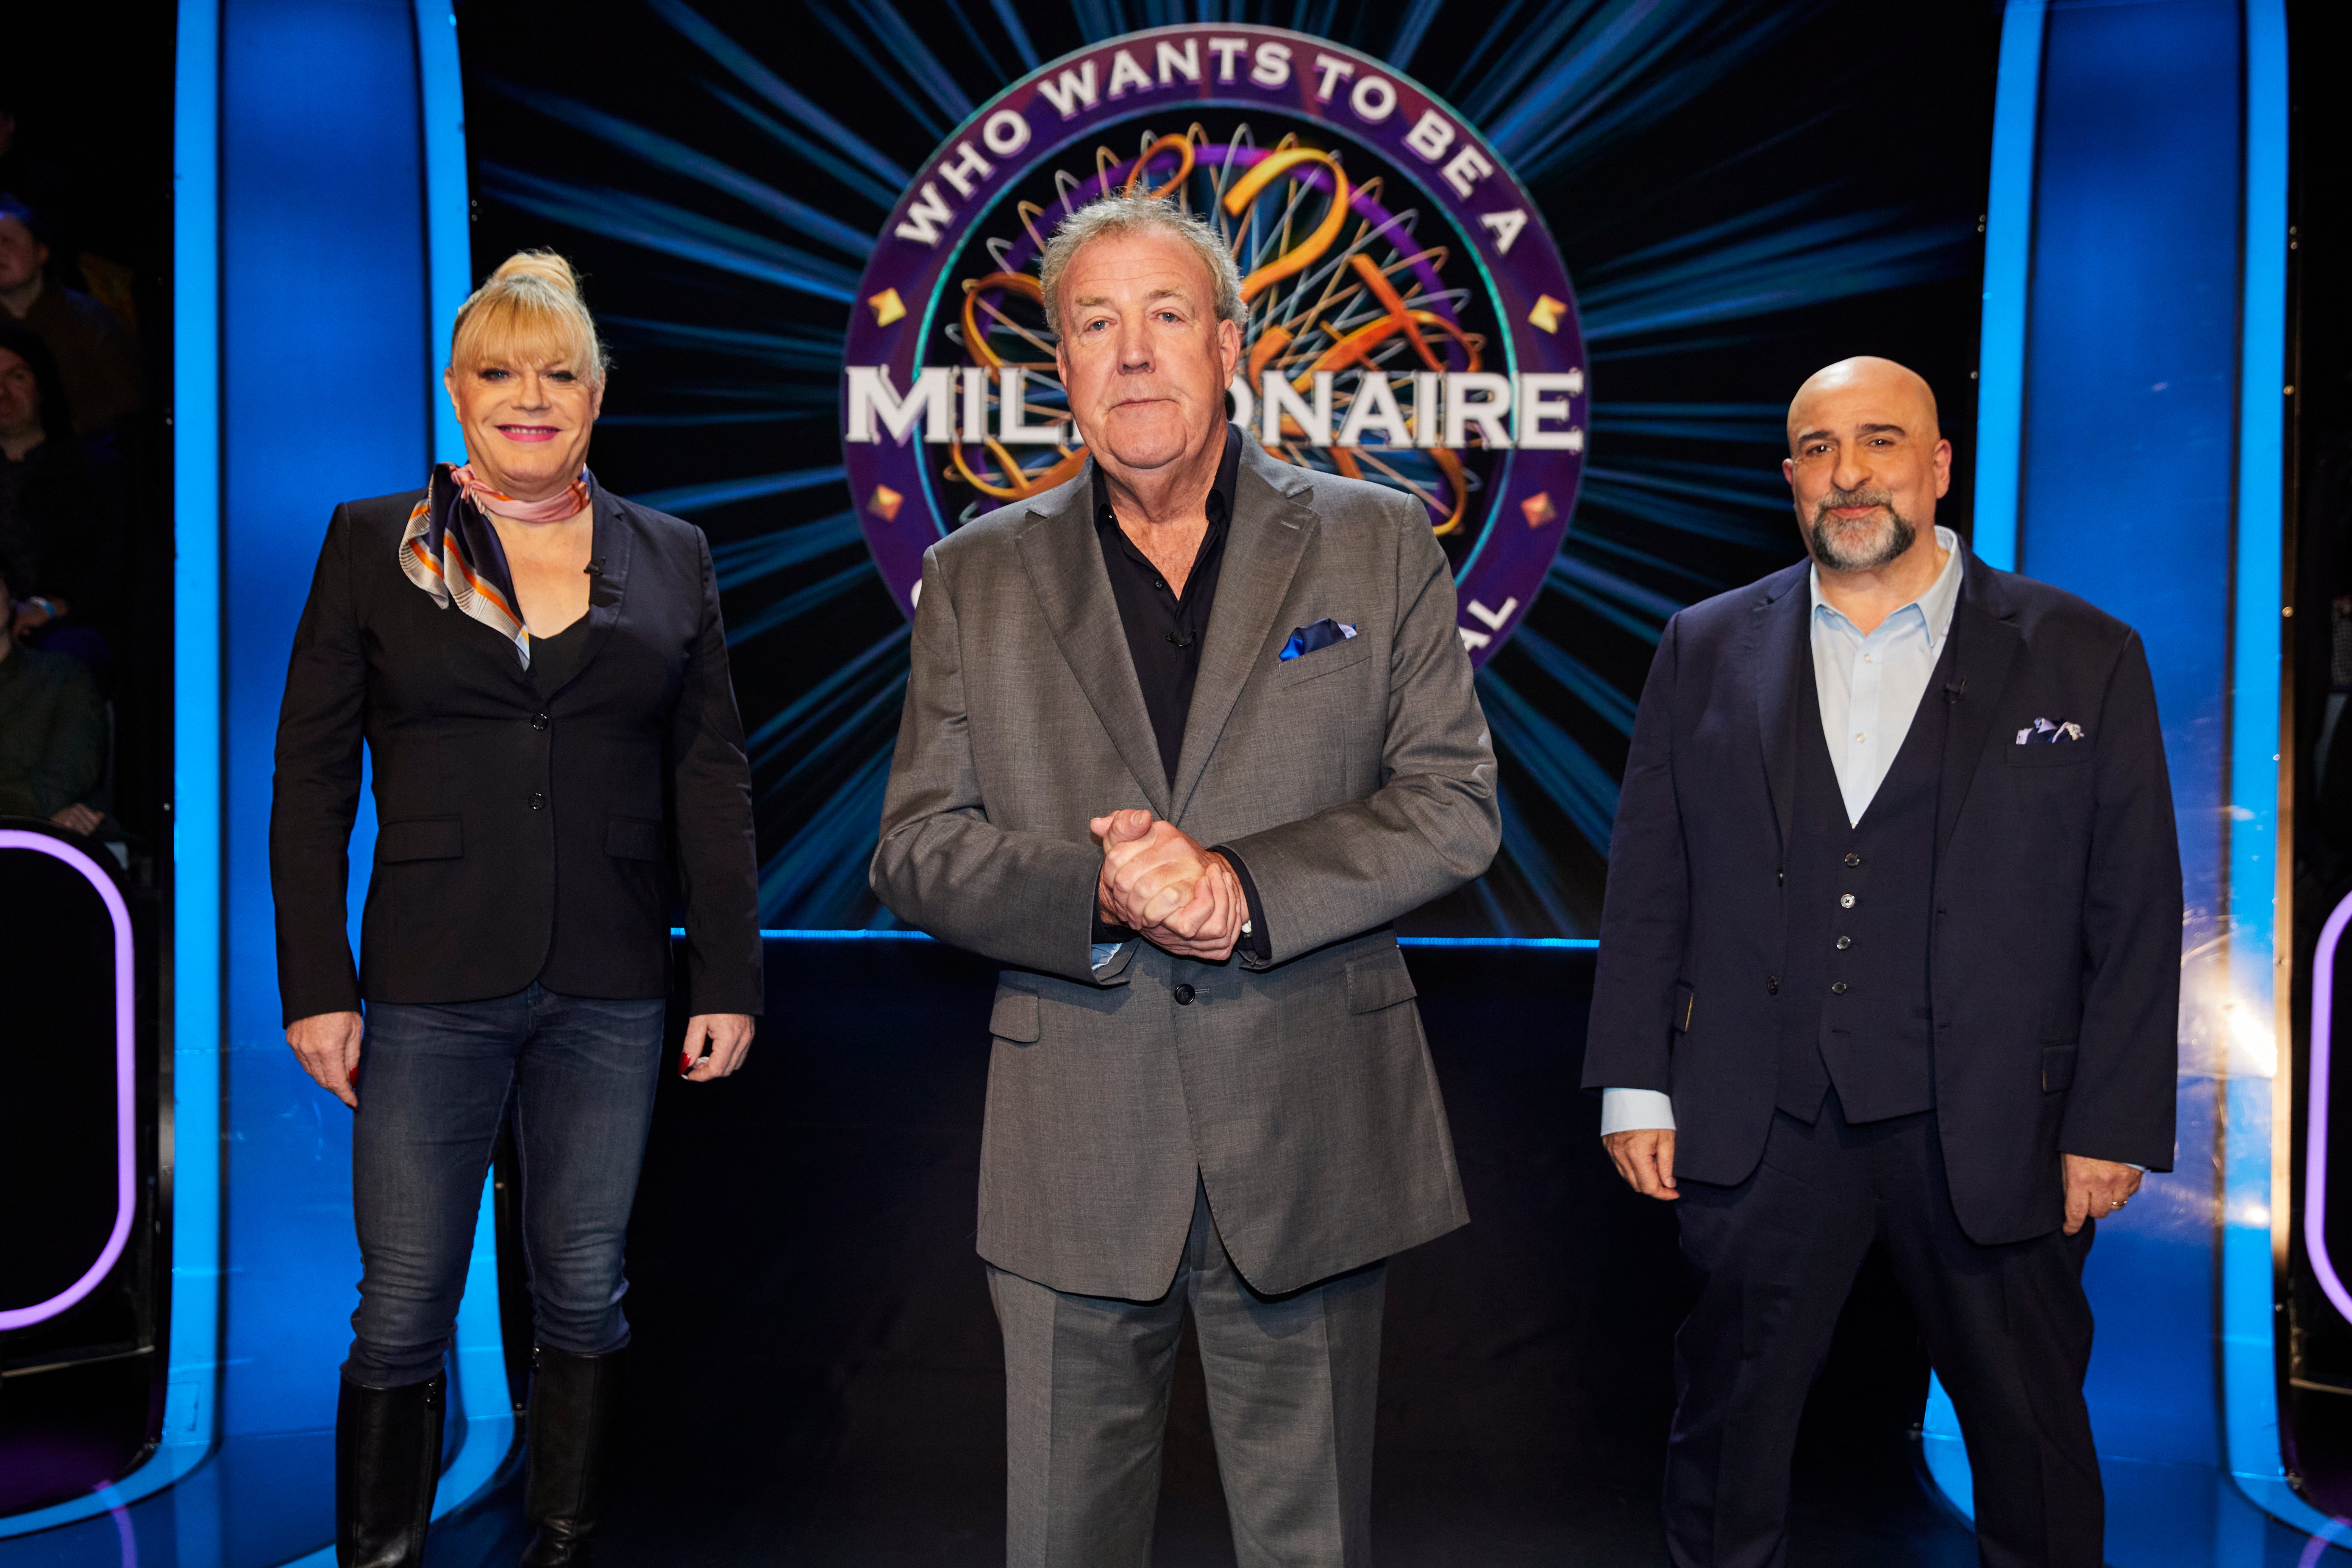 Eddie Izzard will appear on the next season of ‘Who Wants to be a Millionaire?’